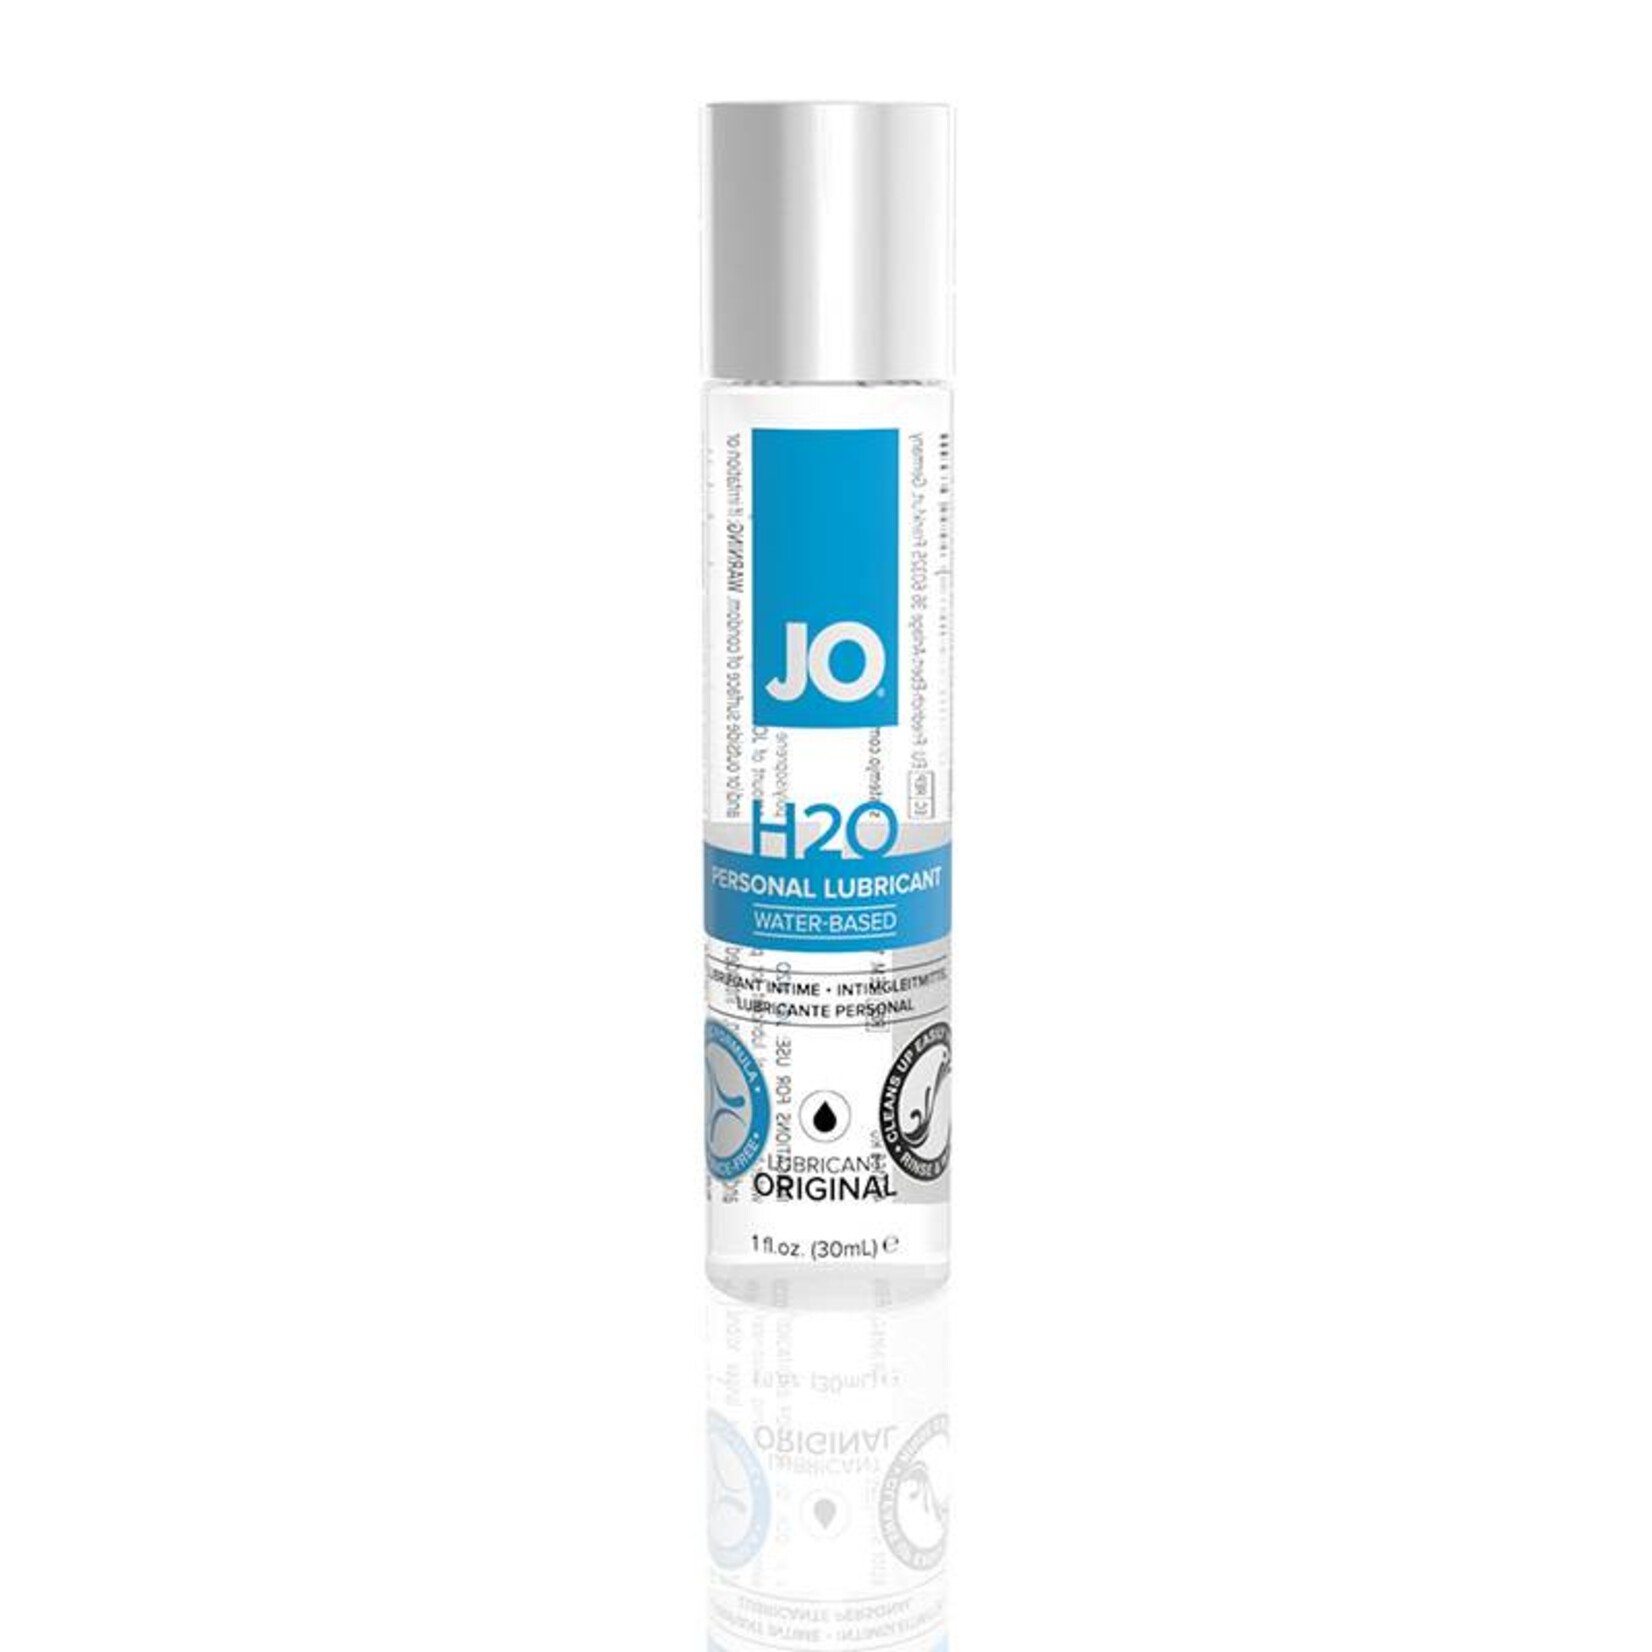 System JO JO H2O Water-Based Personal Lubricant 1oz